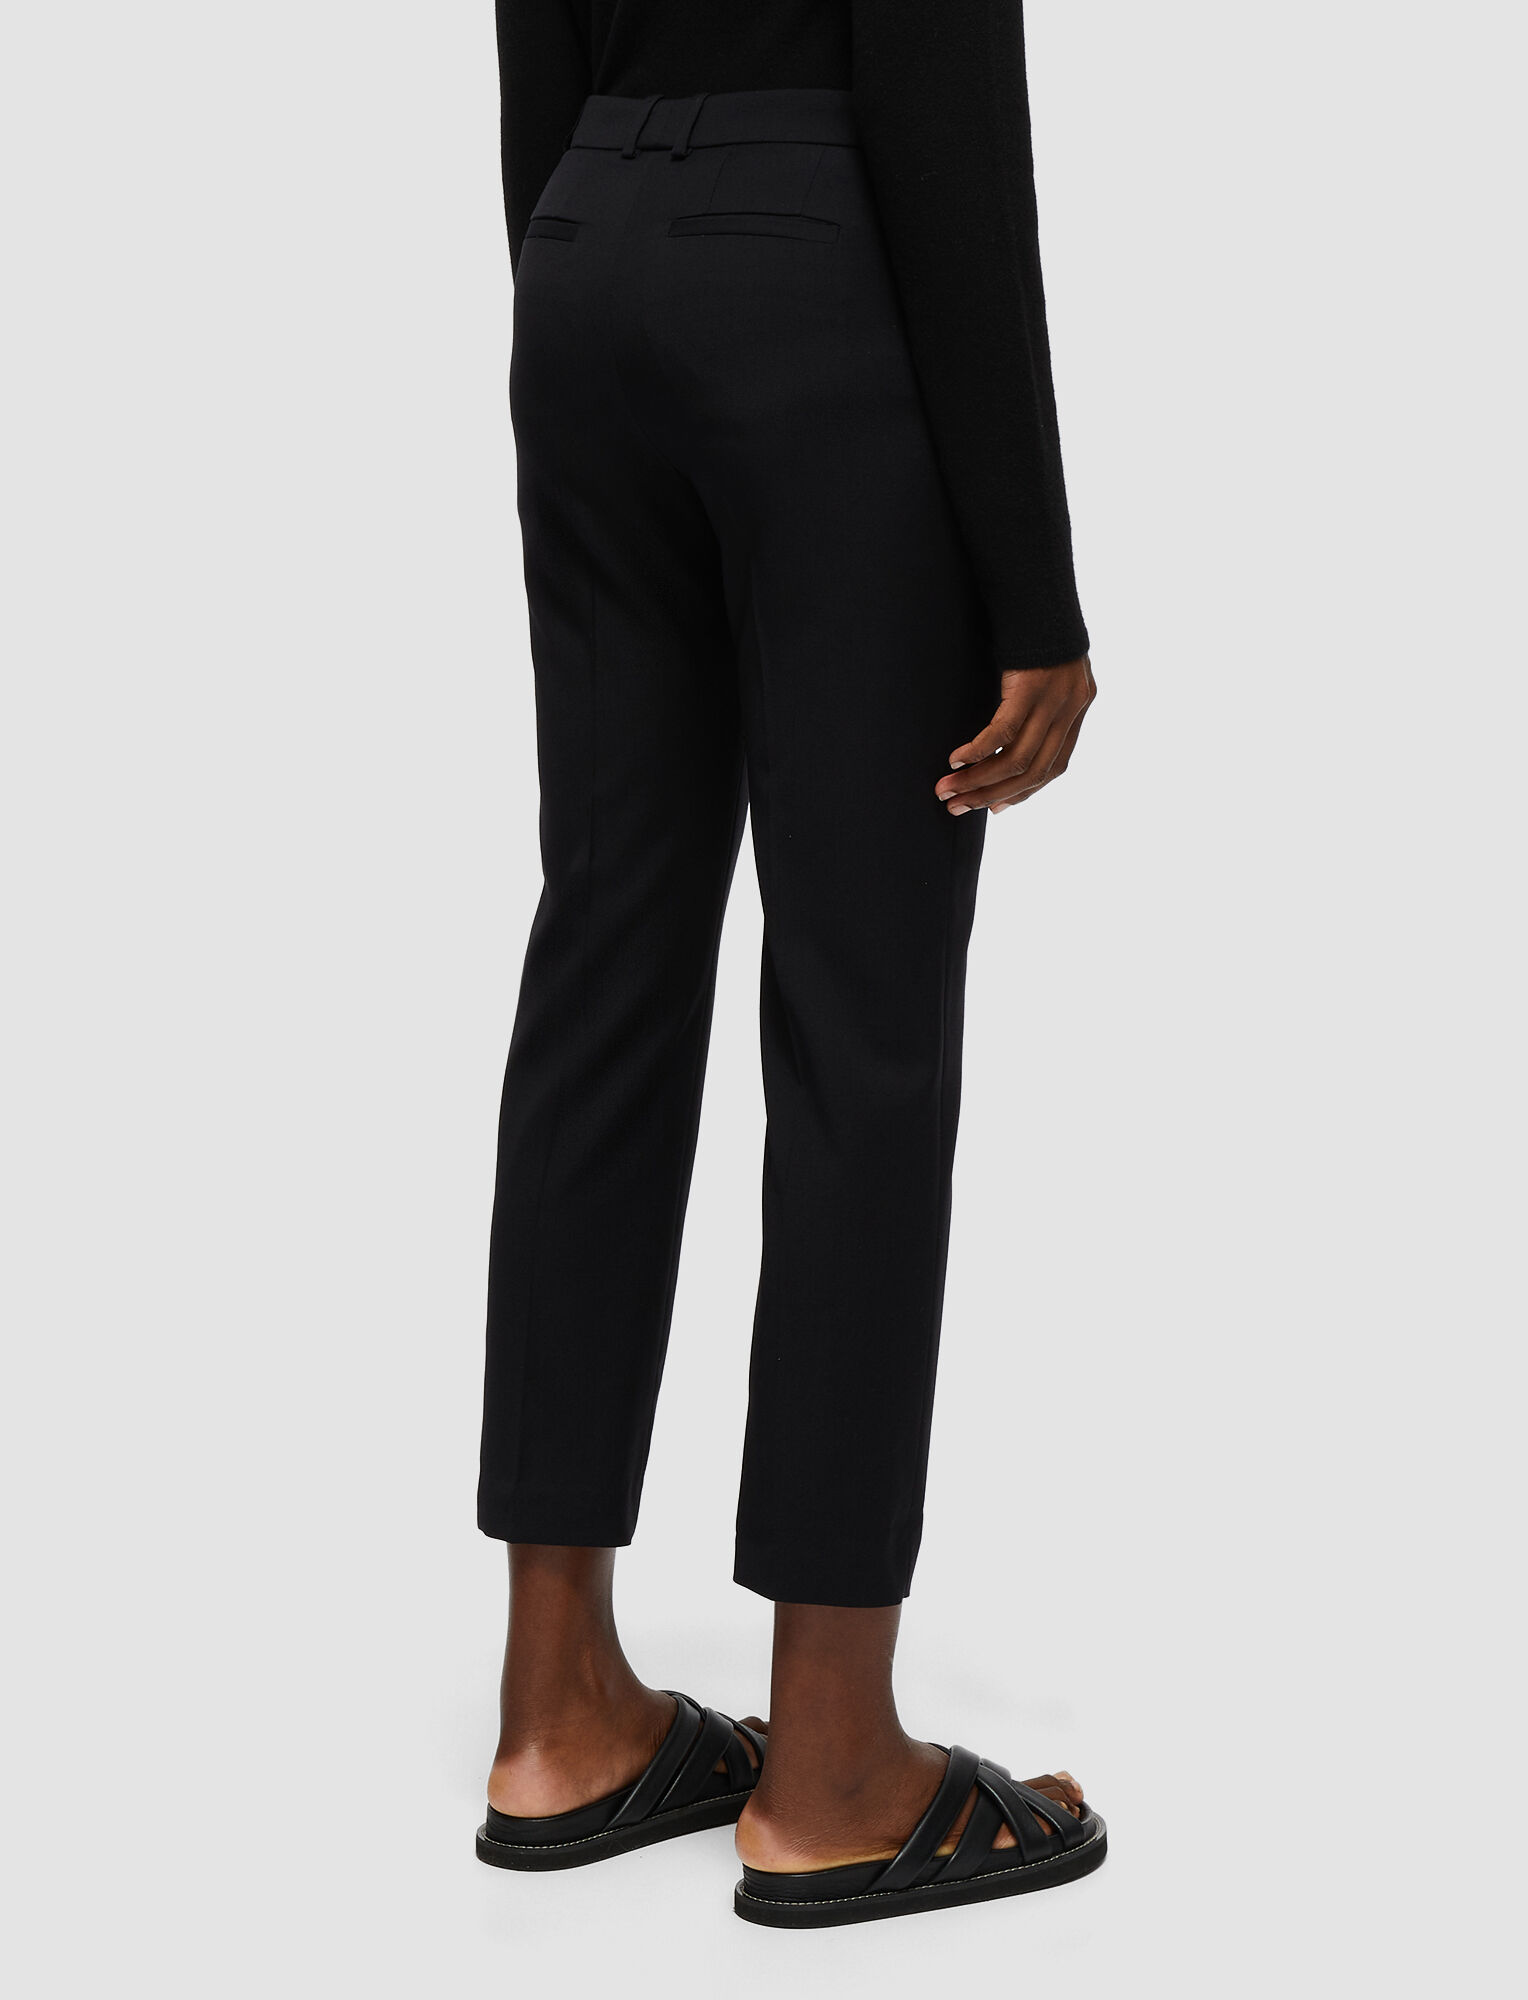 Joseph, Tailoring Wool Stretch Coleman Trousers, in 